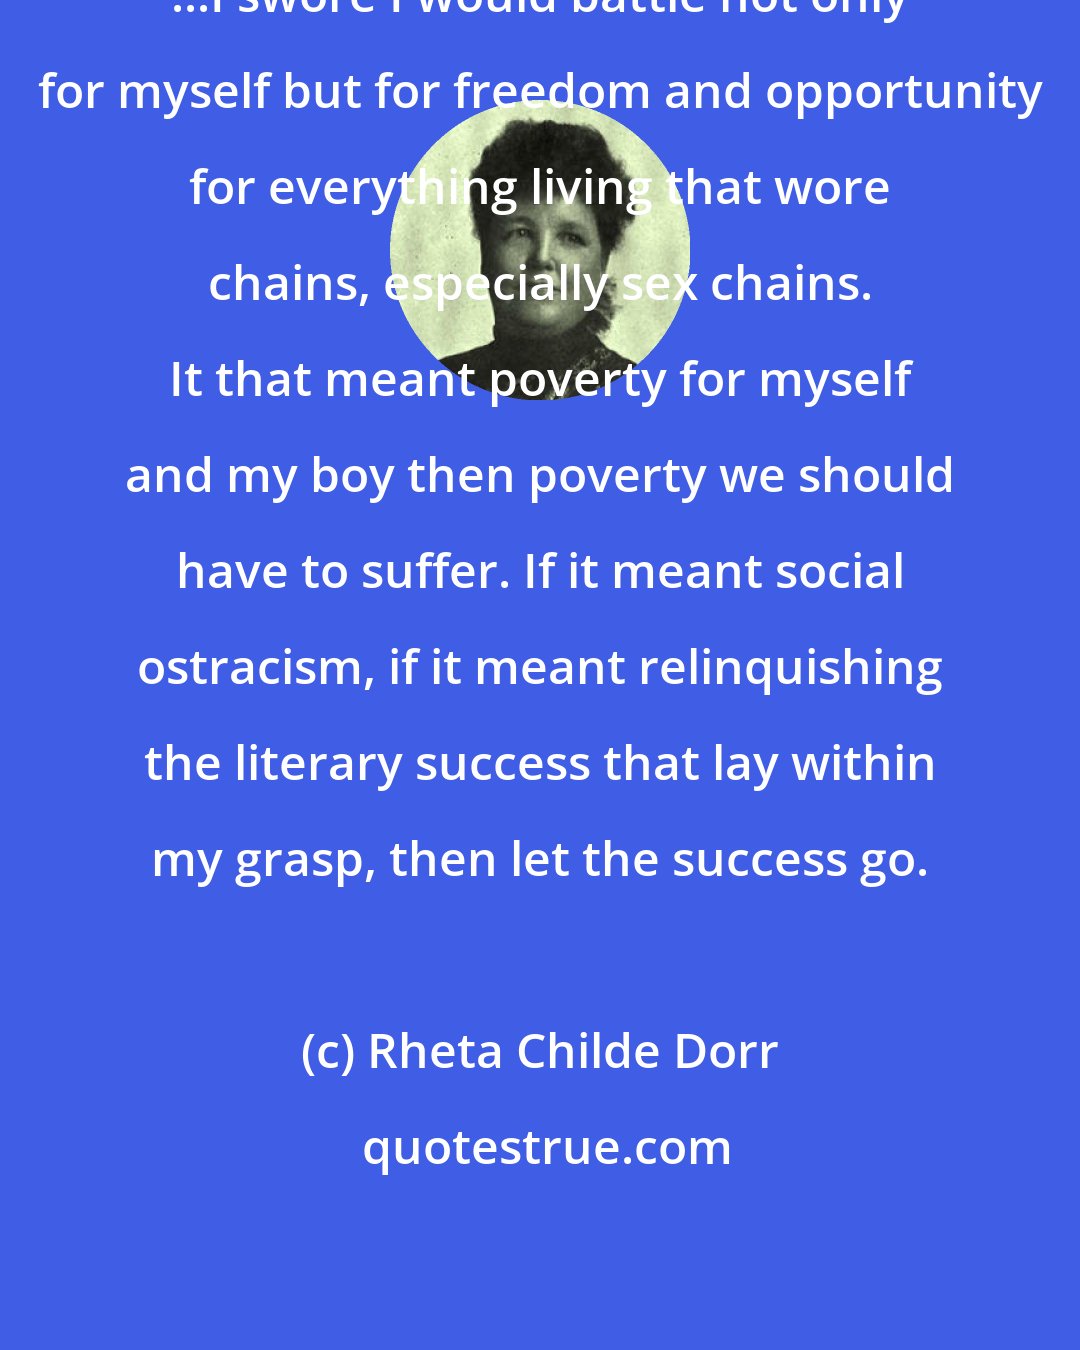 Rheta Childe Dorr: ...I swore I would battle not only for myself but for freedom and opportunity for everything living that wore chains, especially sex chains. It that meant poverty for myself and my boy then poverty we should have to suffer. If it meant social ostracism, if it meant relinquishing the literary success that lay within my grasp, then let the success go.